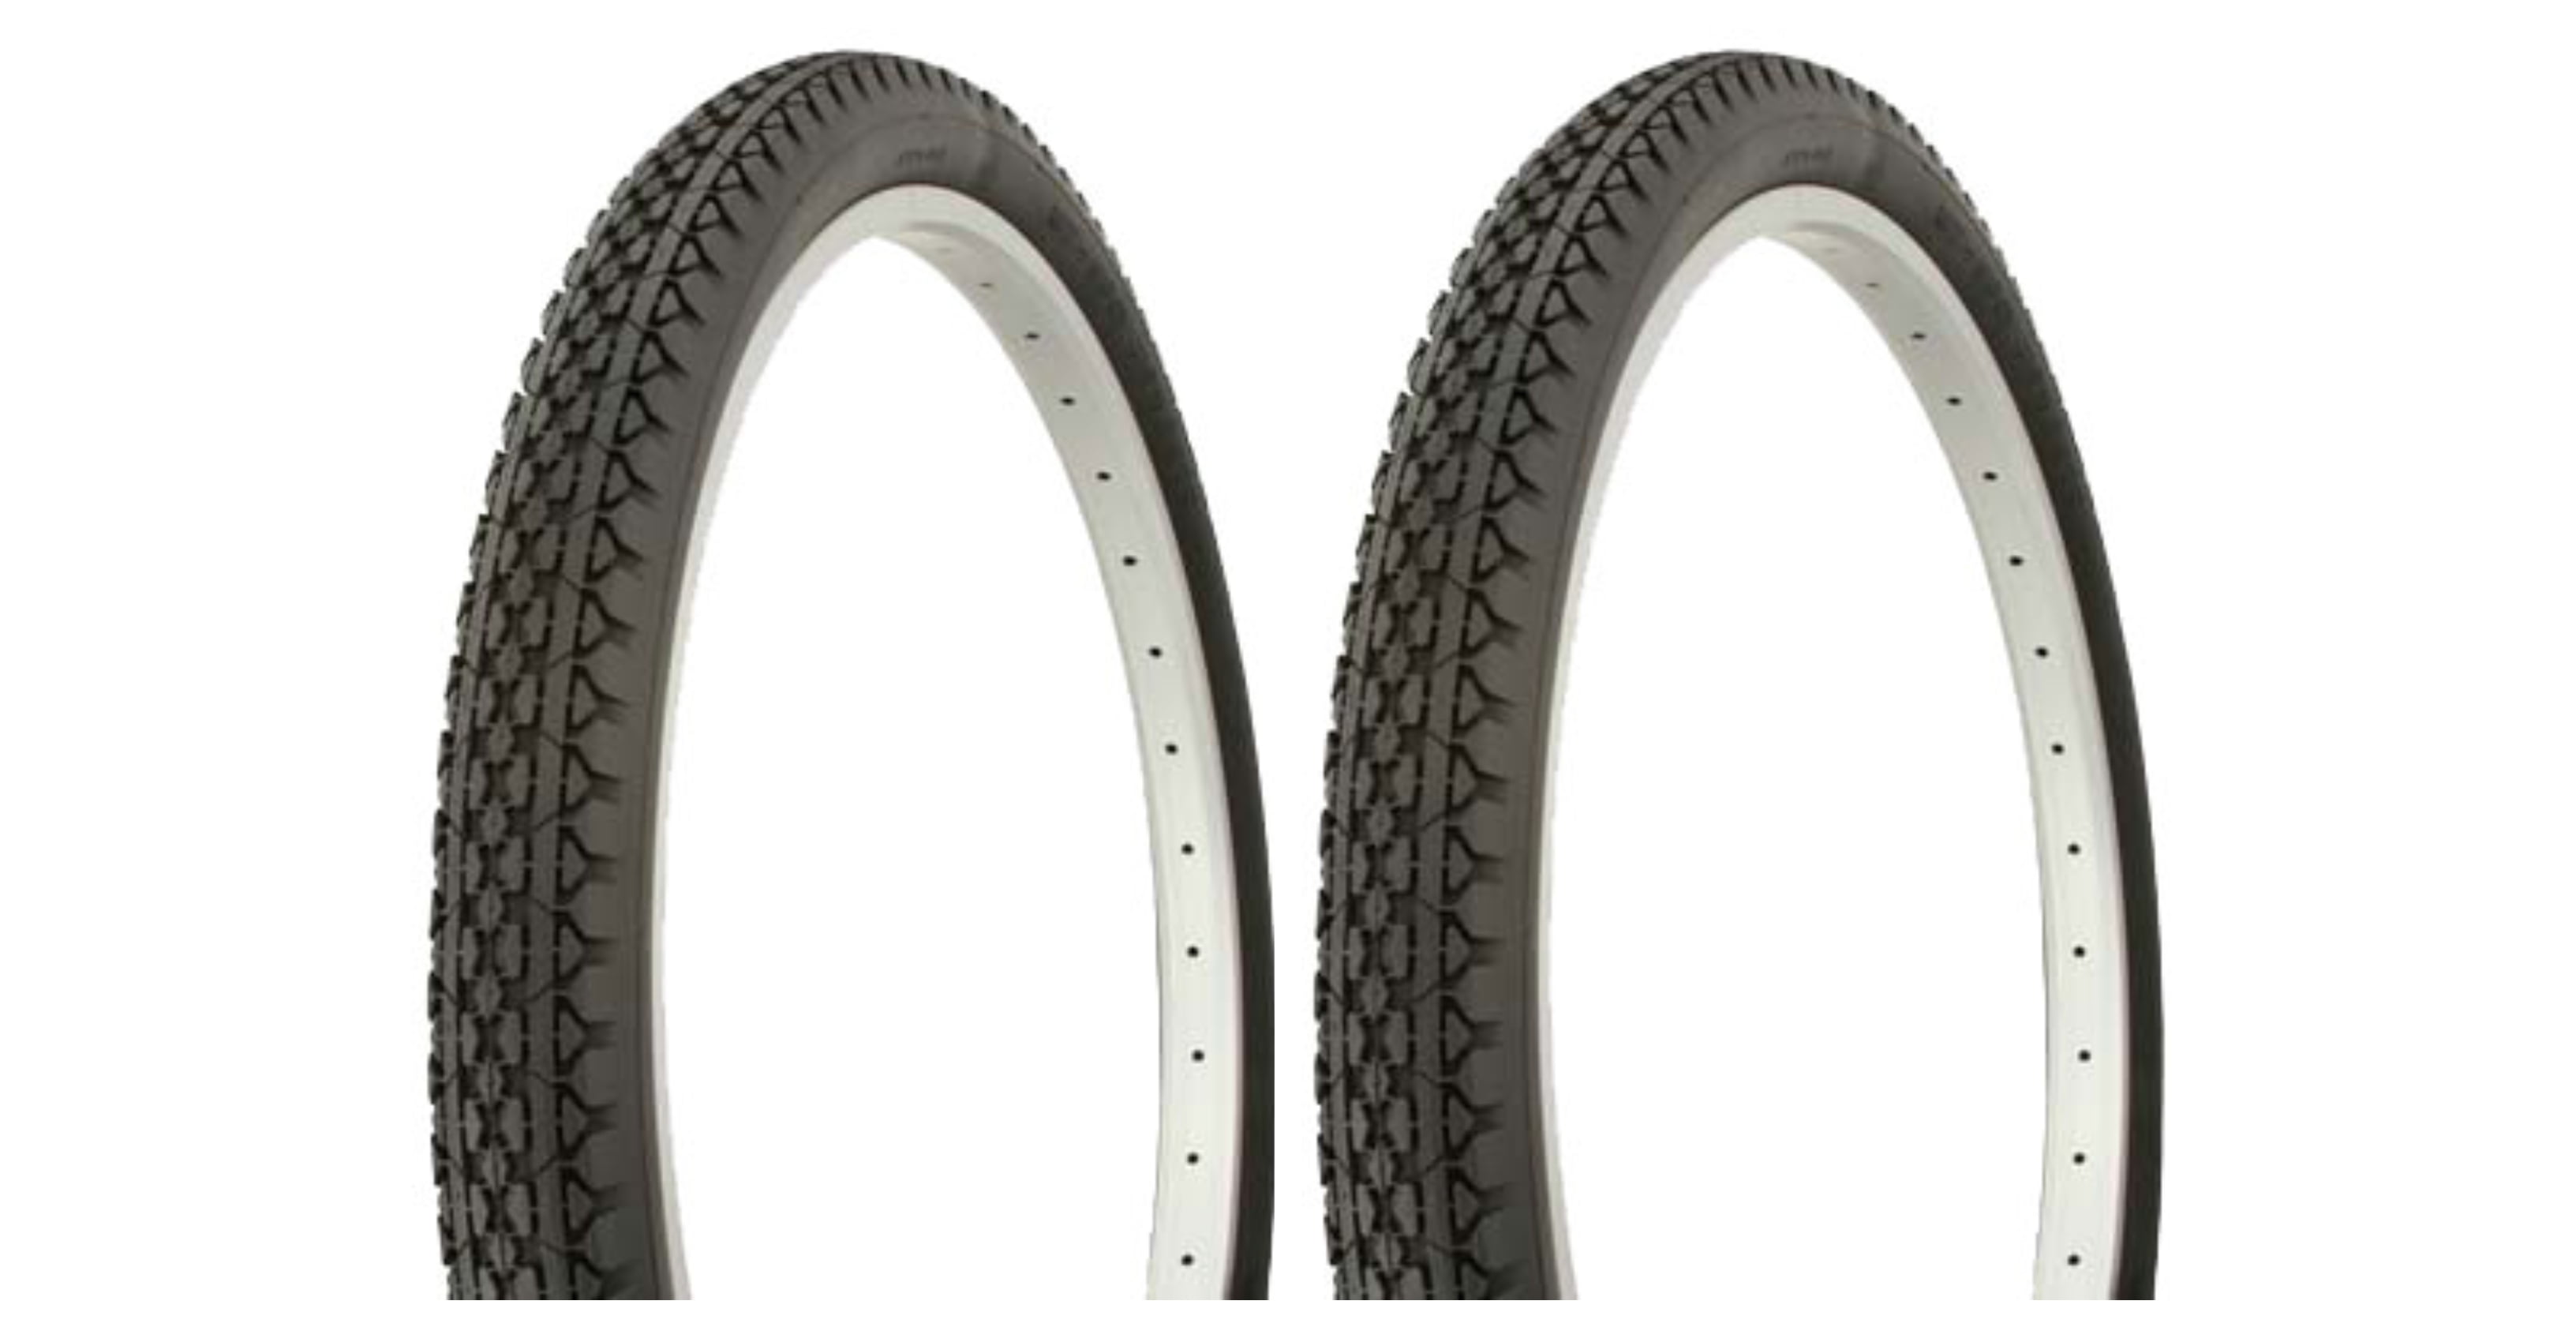 NEW ORIGINAL BICYCLE DURO TIRE IN 26 X 1.75 BLACK/BLACK SIDE WALL IN HF-822. 